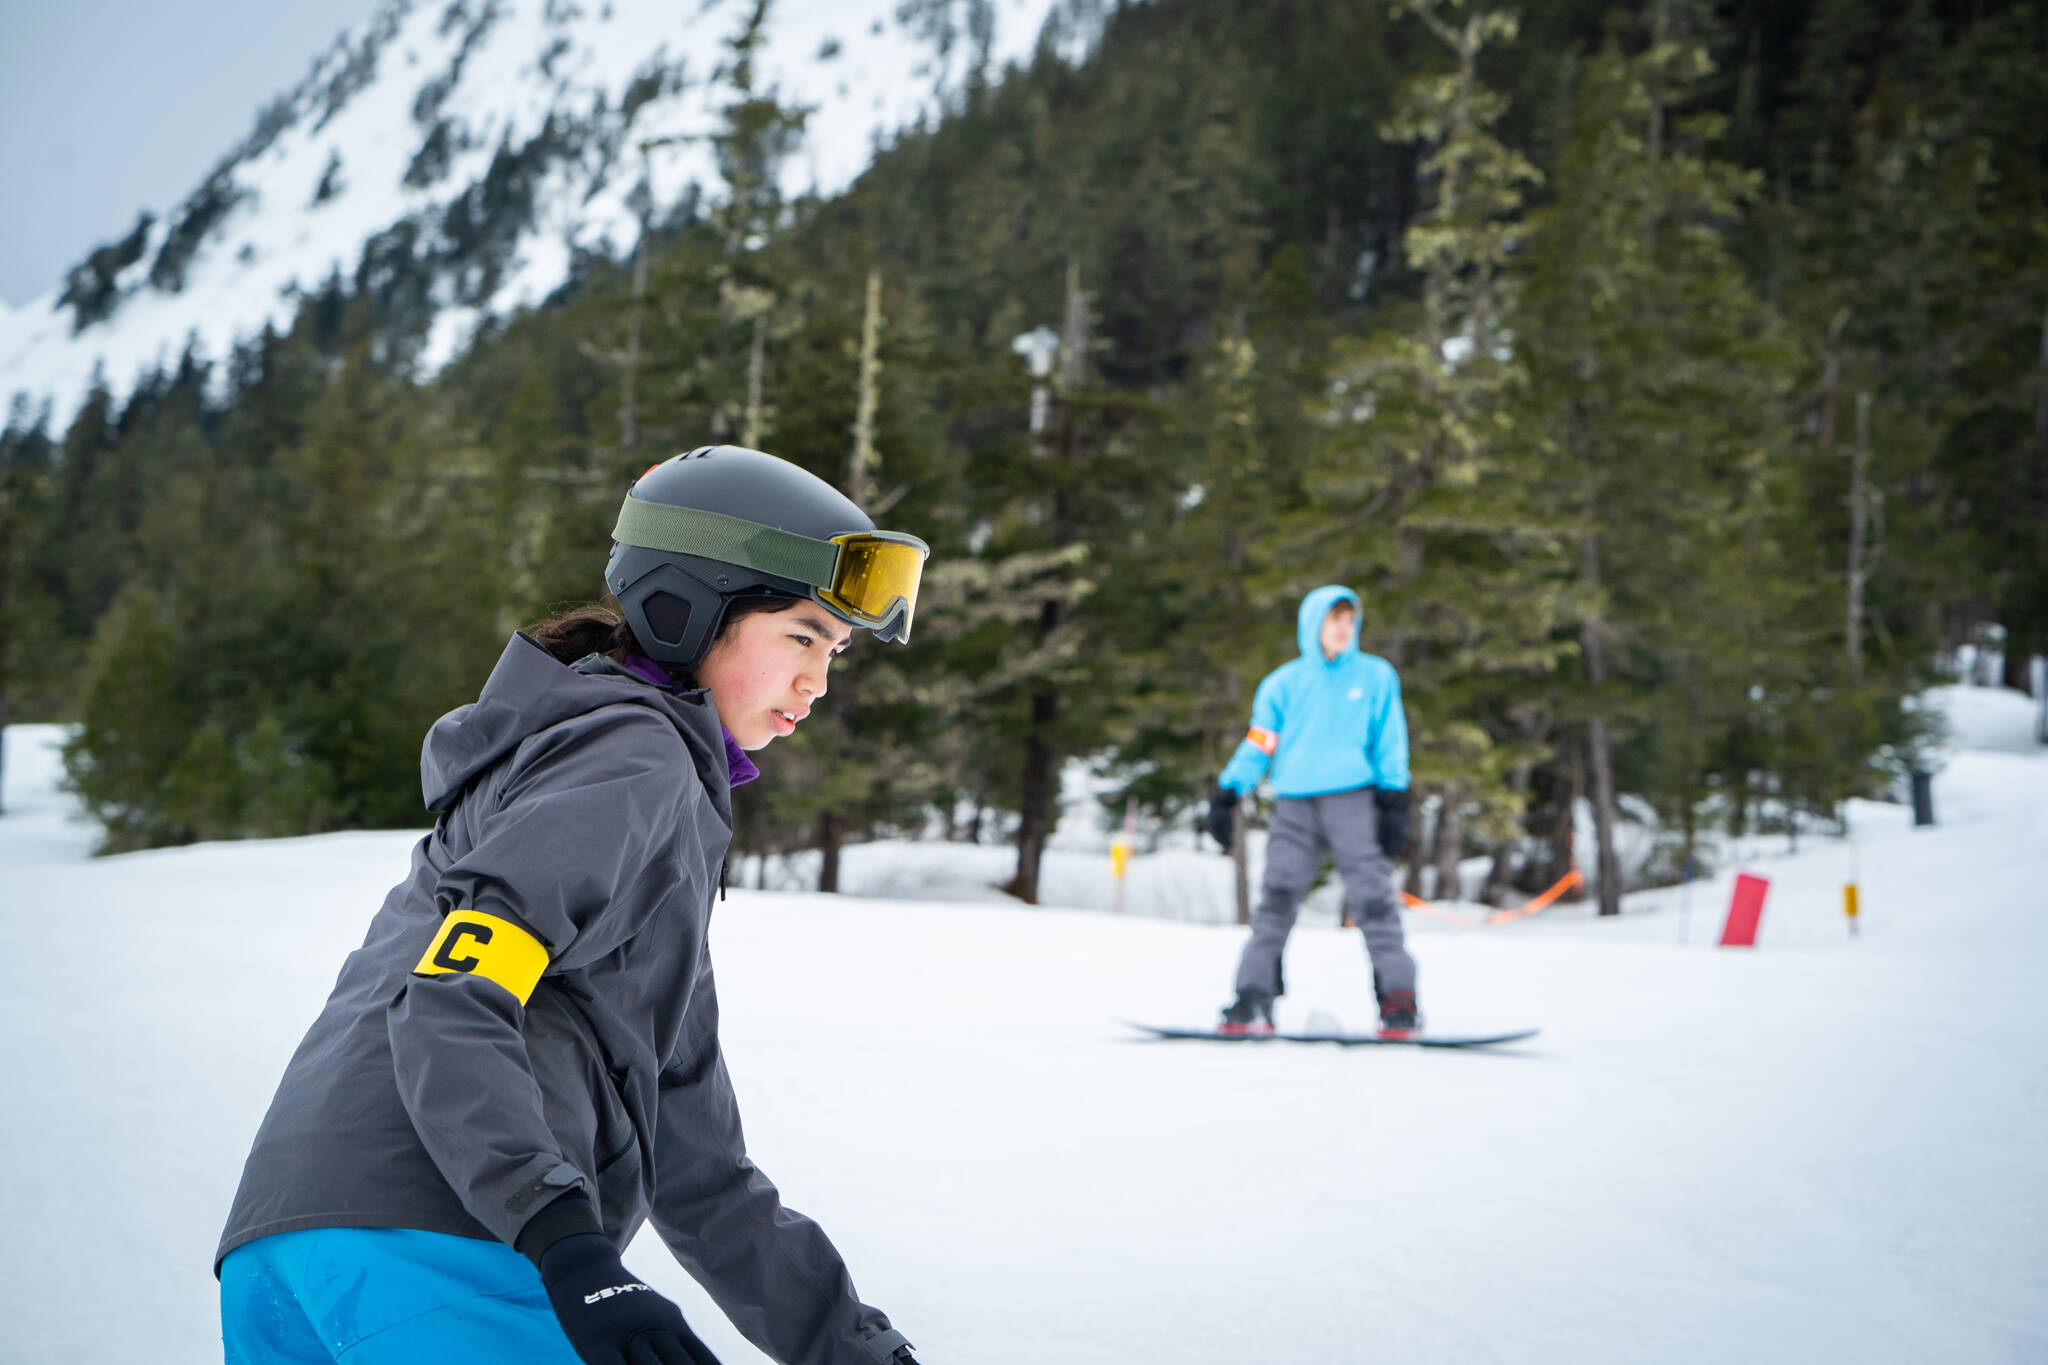 Aliyah Merculief focuses on her run while snowboarding at Snow Camp. (Photo by Lee House / Sitka Conservation Society)